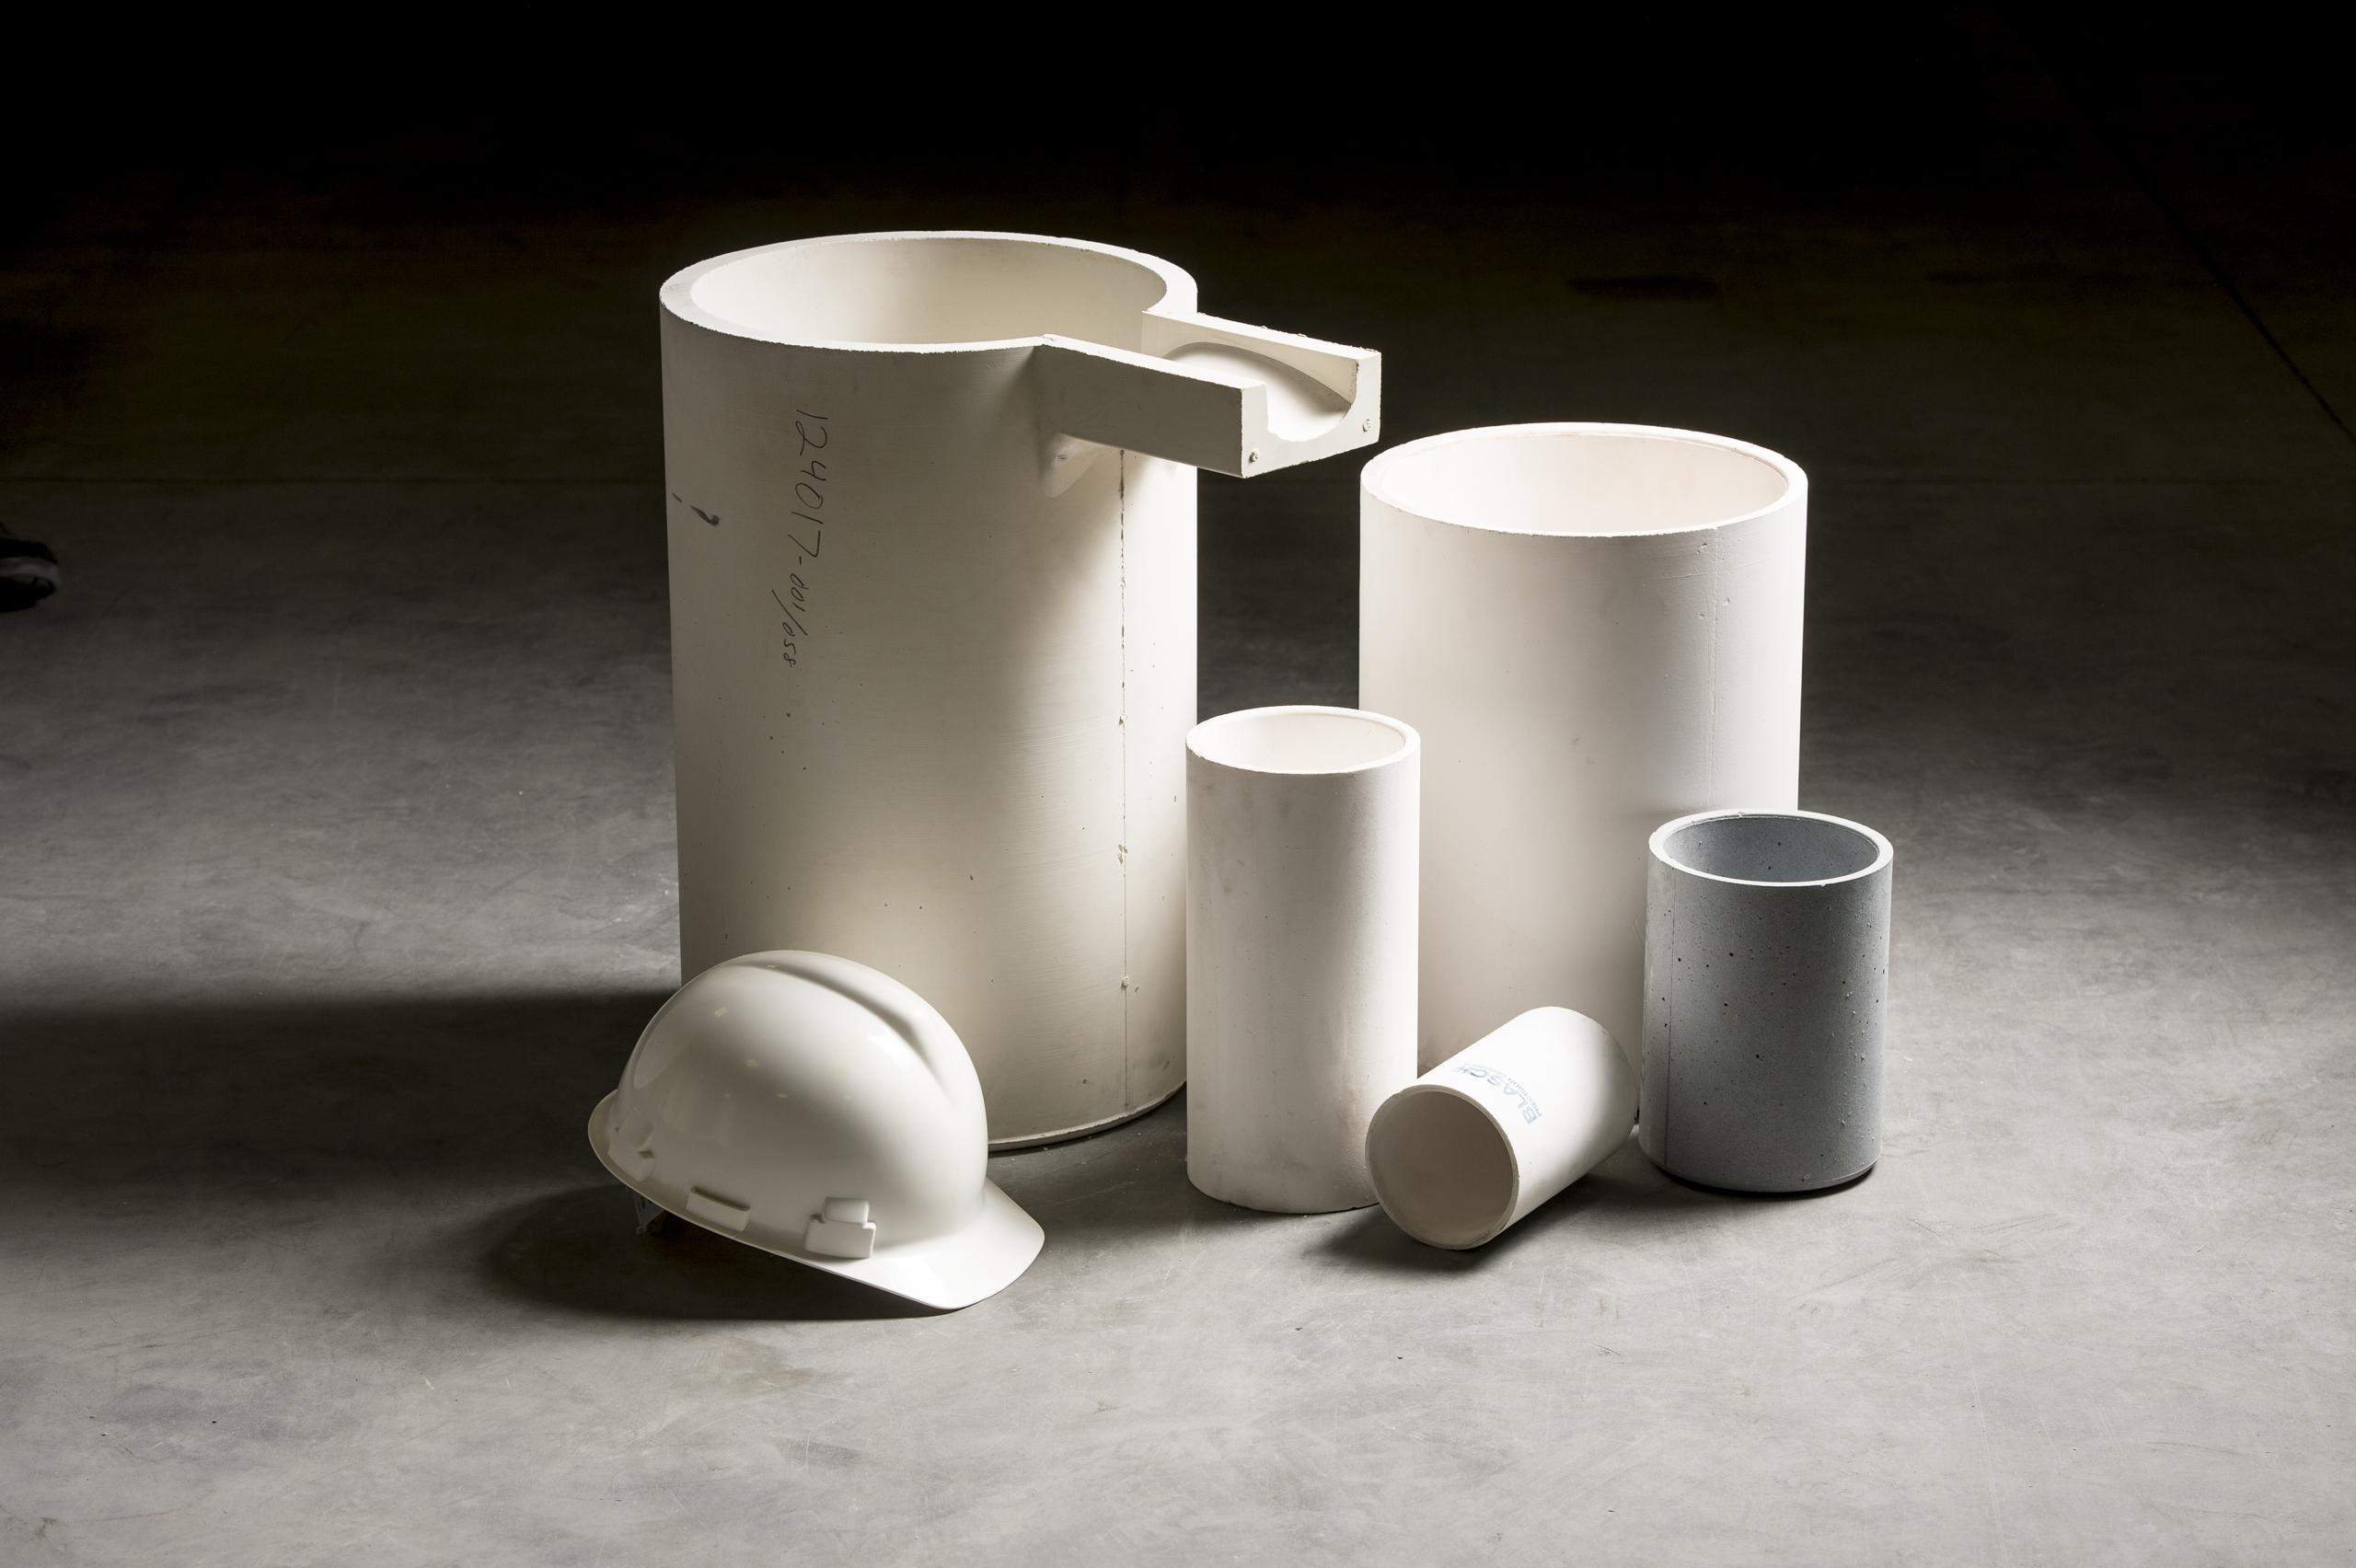 Ceramic Crucibles product imagery on grey background, starkly lit with a directional light